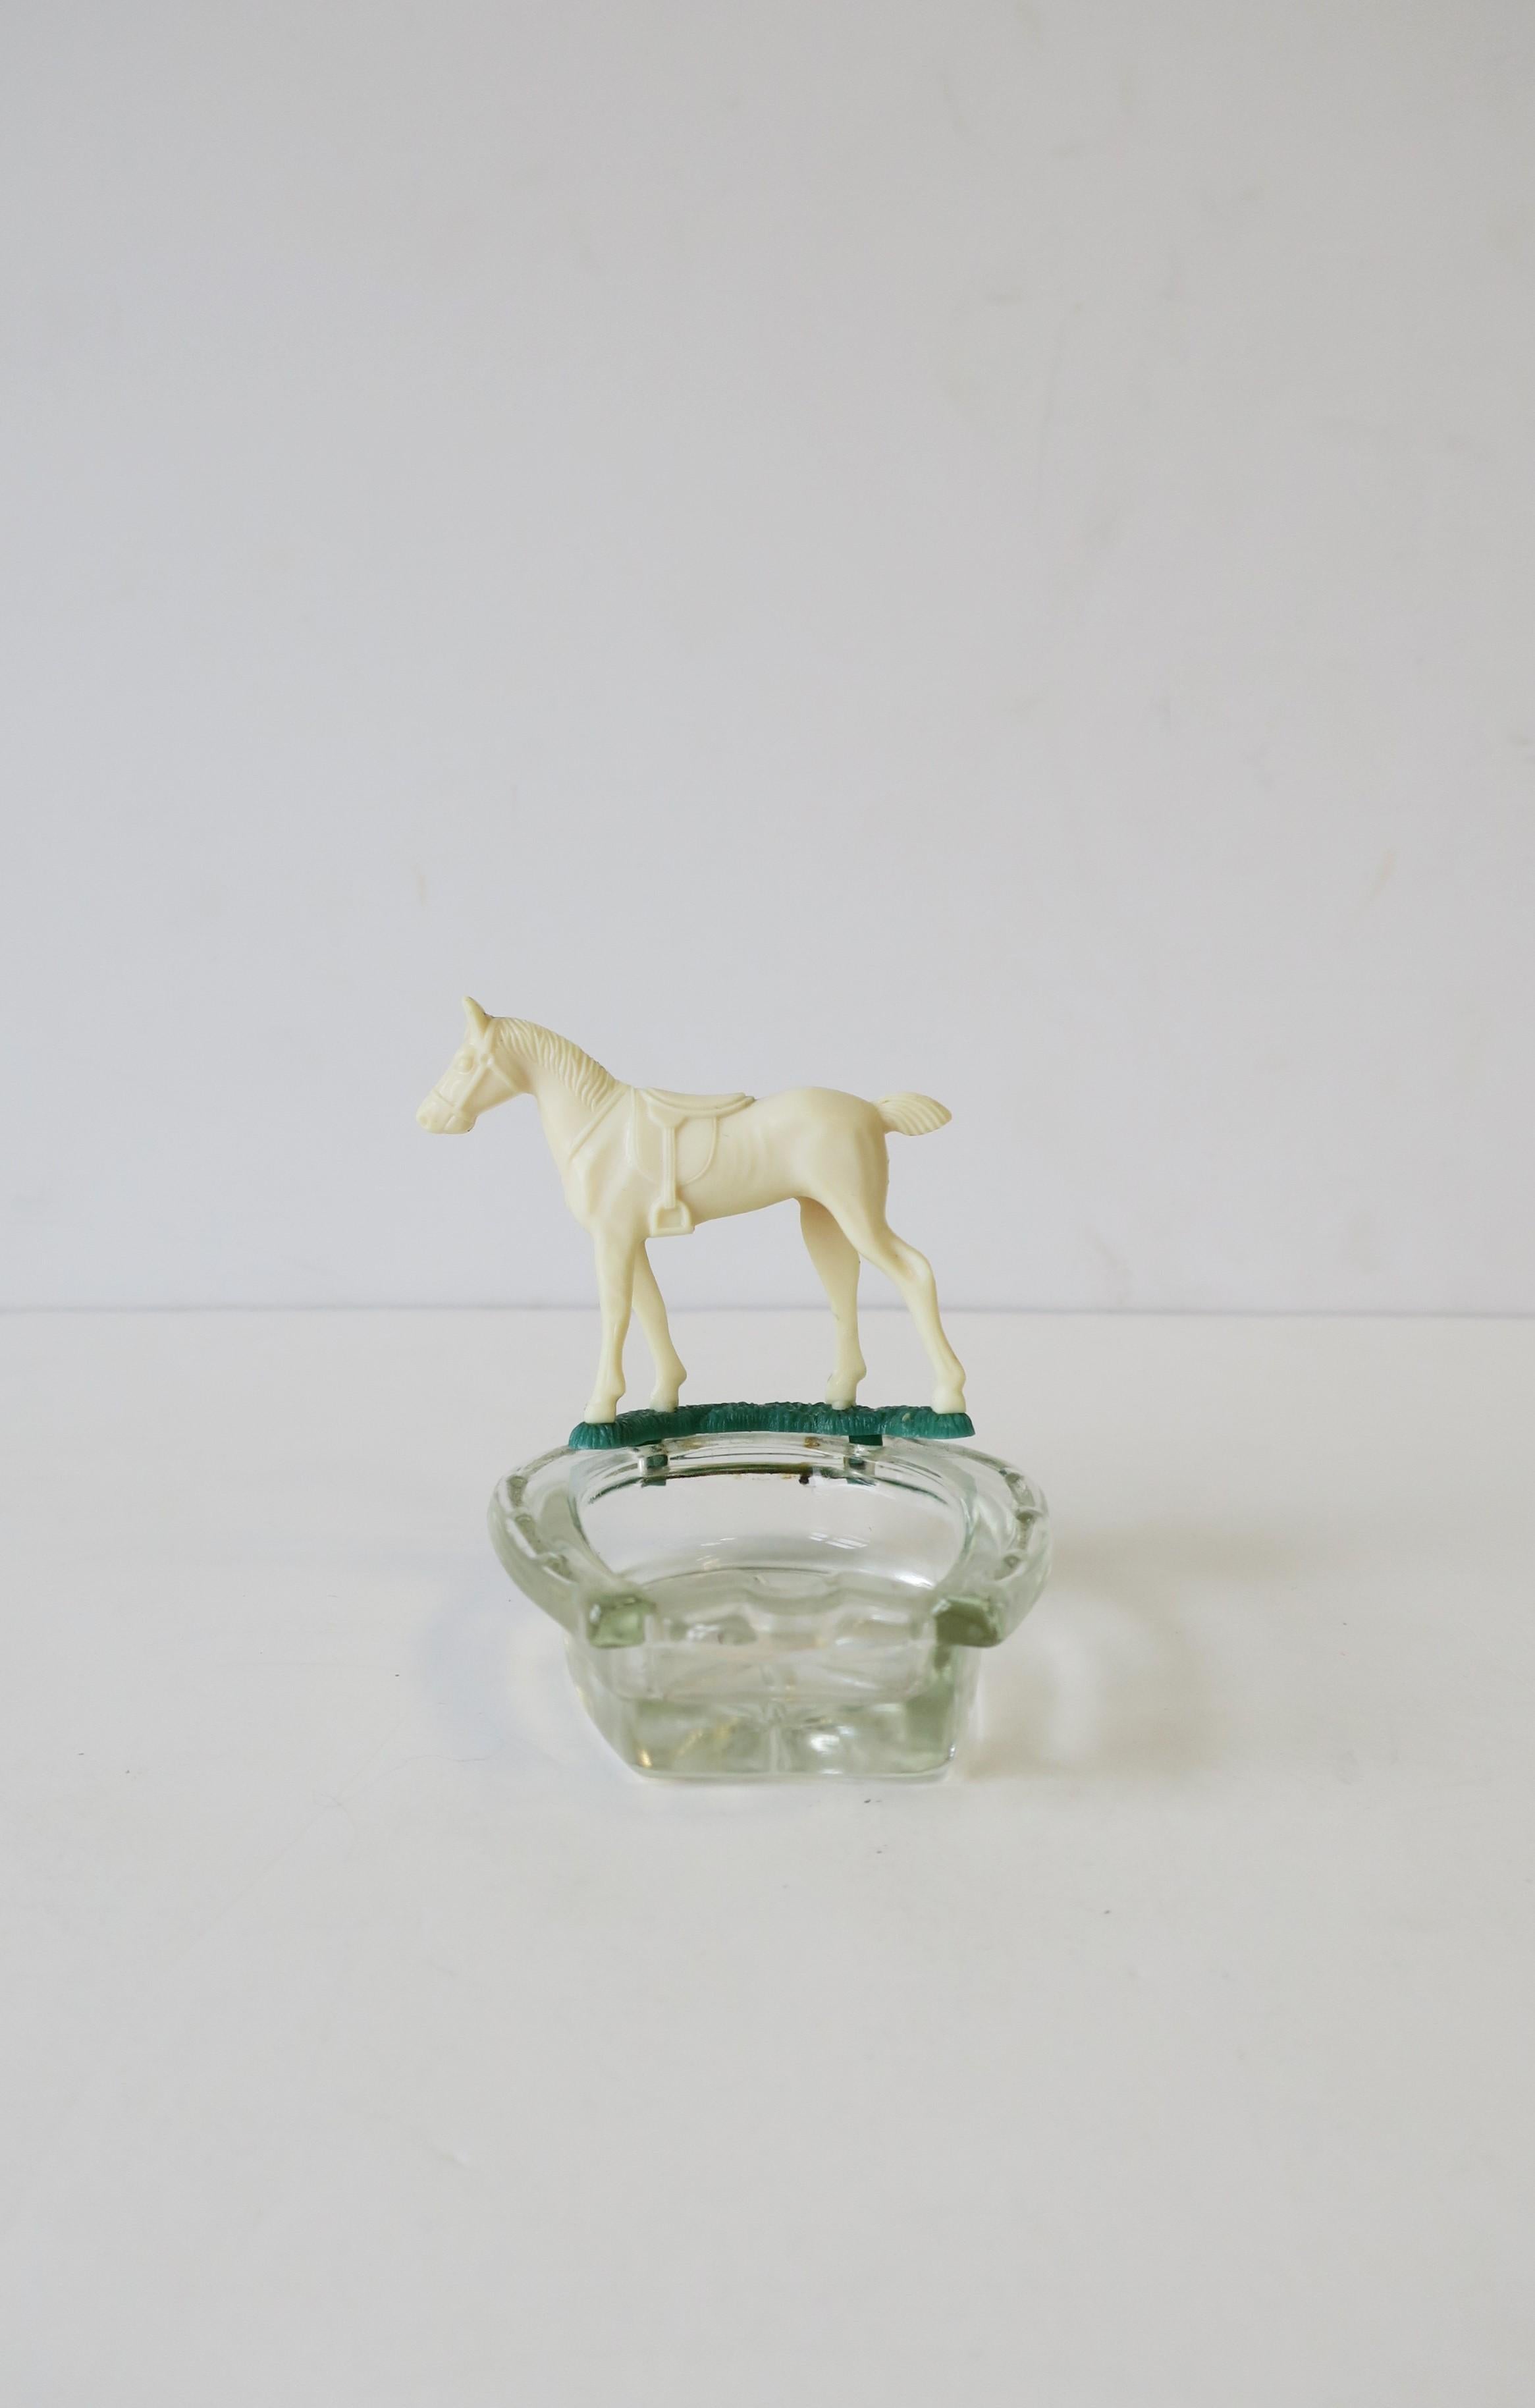 An small equine horse and horseshoe trinket jewelry dish ashtray, circa early 20th century, USA. This beautiful white resin horse, with green grass under hoofs, sits atop a cut glass horseshoe shaped ashtray. Small indent to hold cigarette. Nice